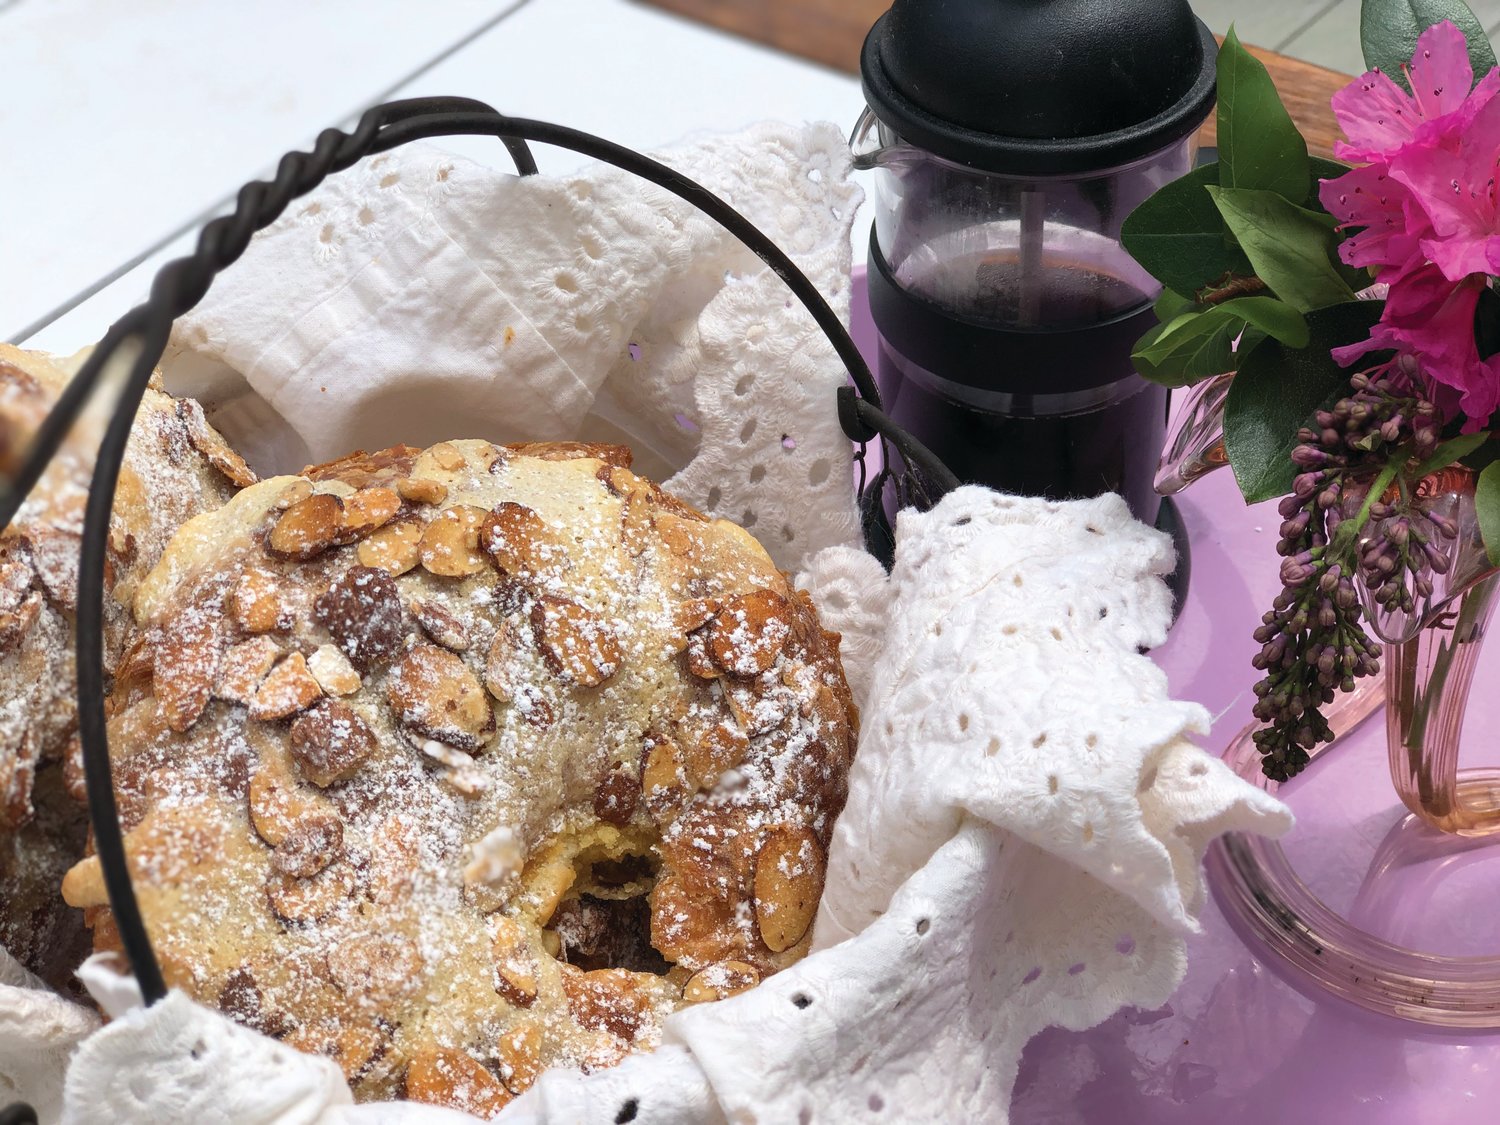 Almond croissants provide a base for a delicious Mother’s Day brunch.